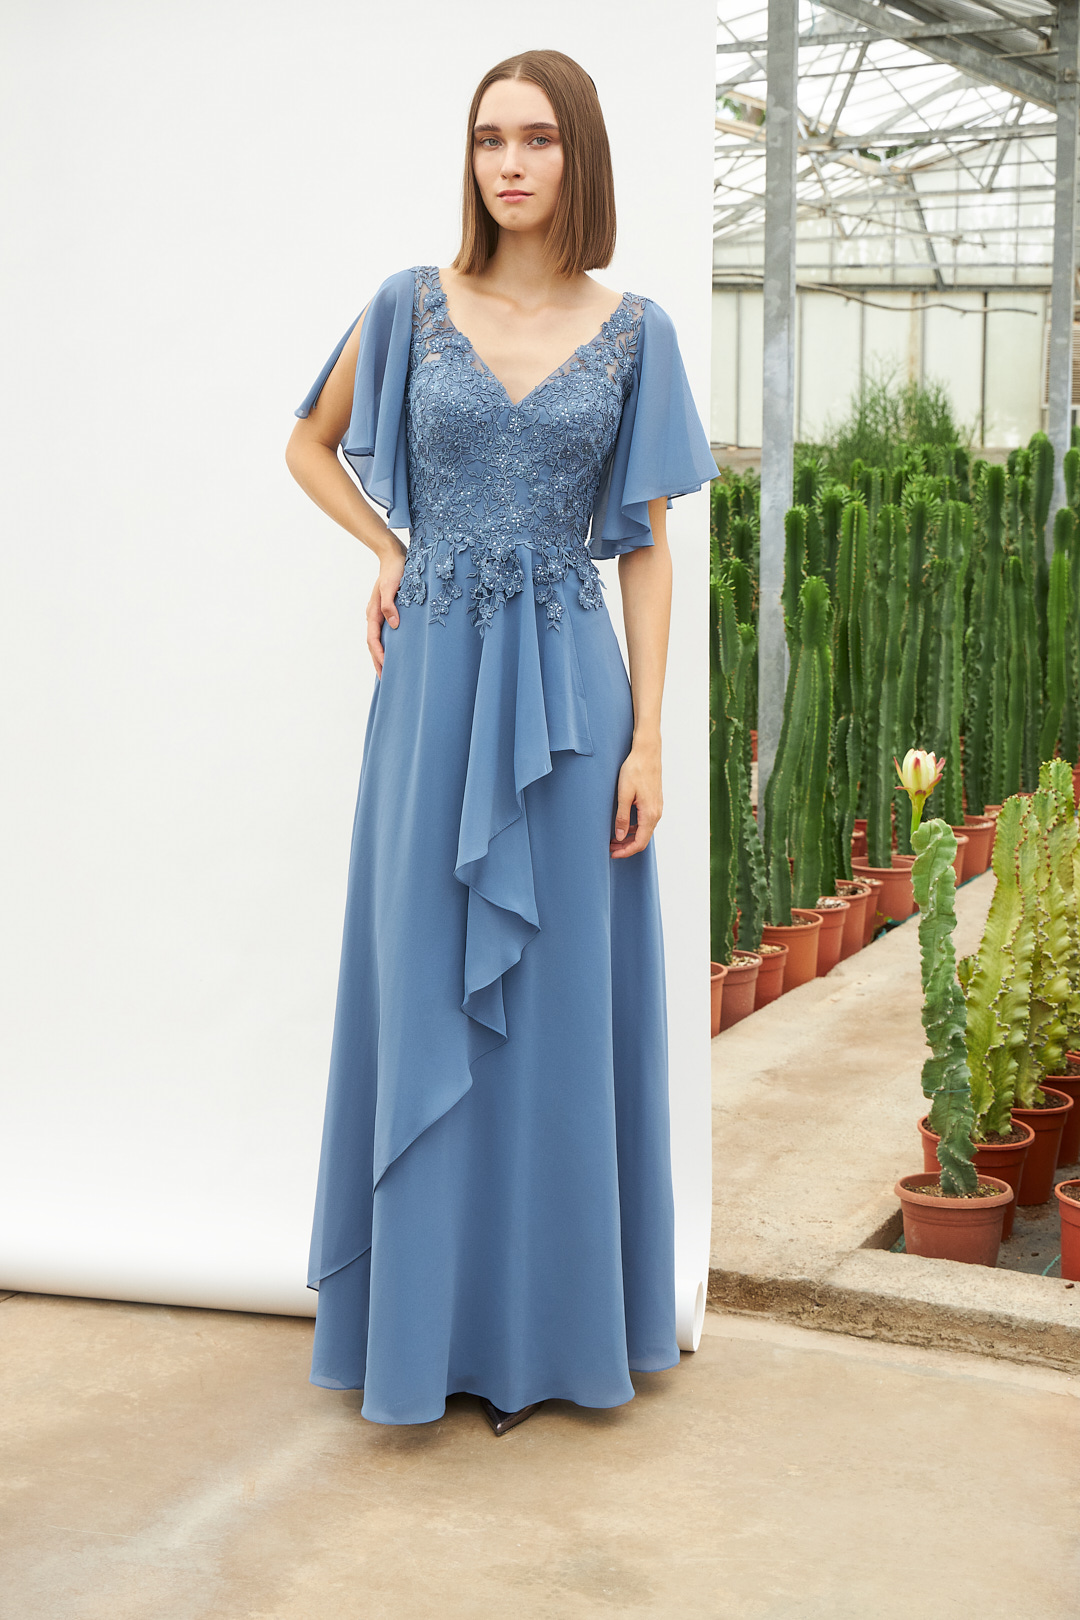 Classic Dresses / Long classic chiffon dress with lace and beaded top and short sleeves